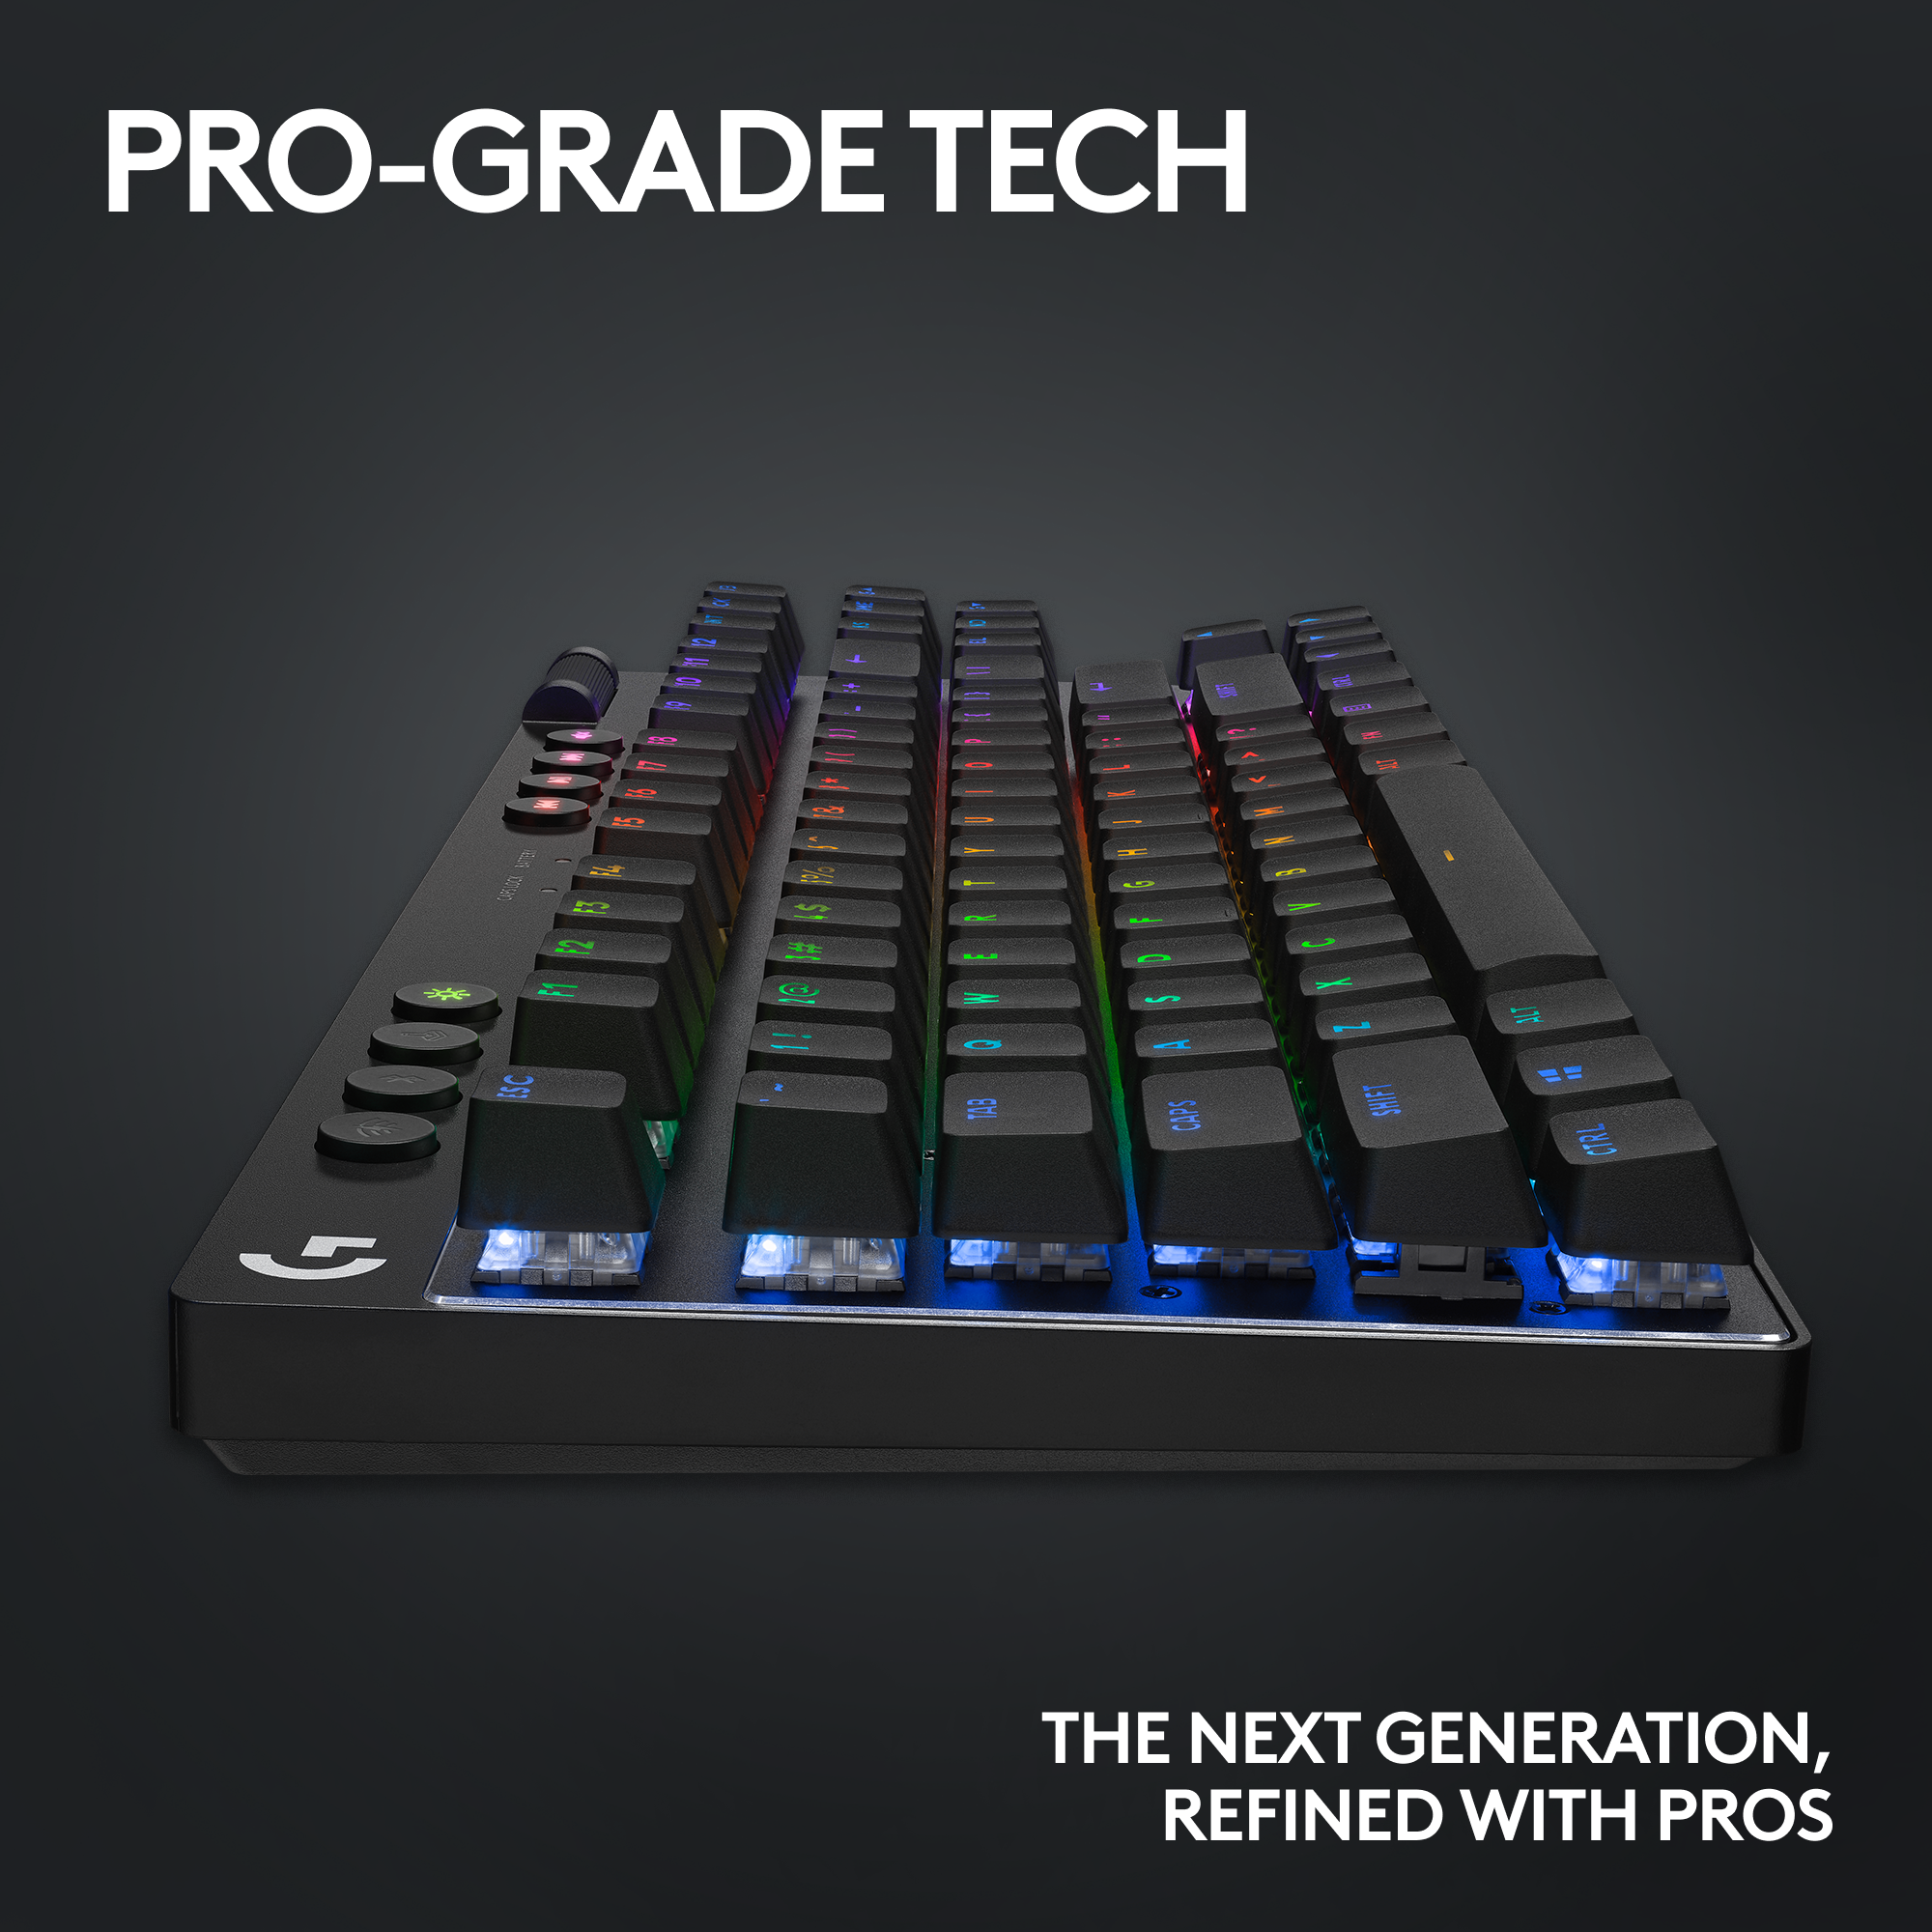 A large marketing image providing additional information about the product Logitech G PRO X TKL Lightspeed Wireless Gaming Keyboard - Black - Additional alt info not provided